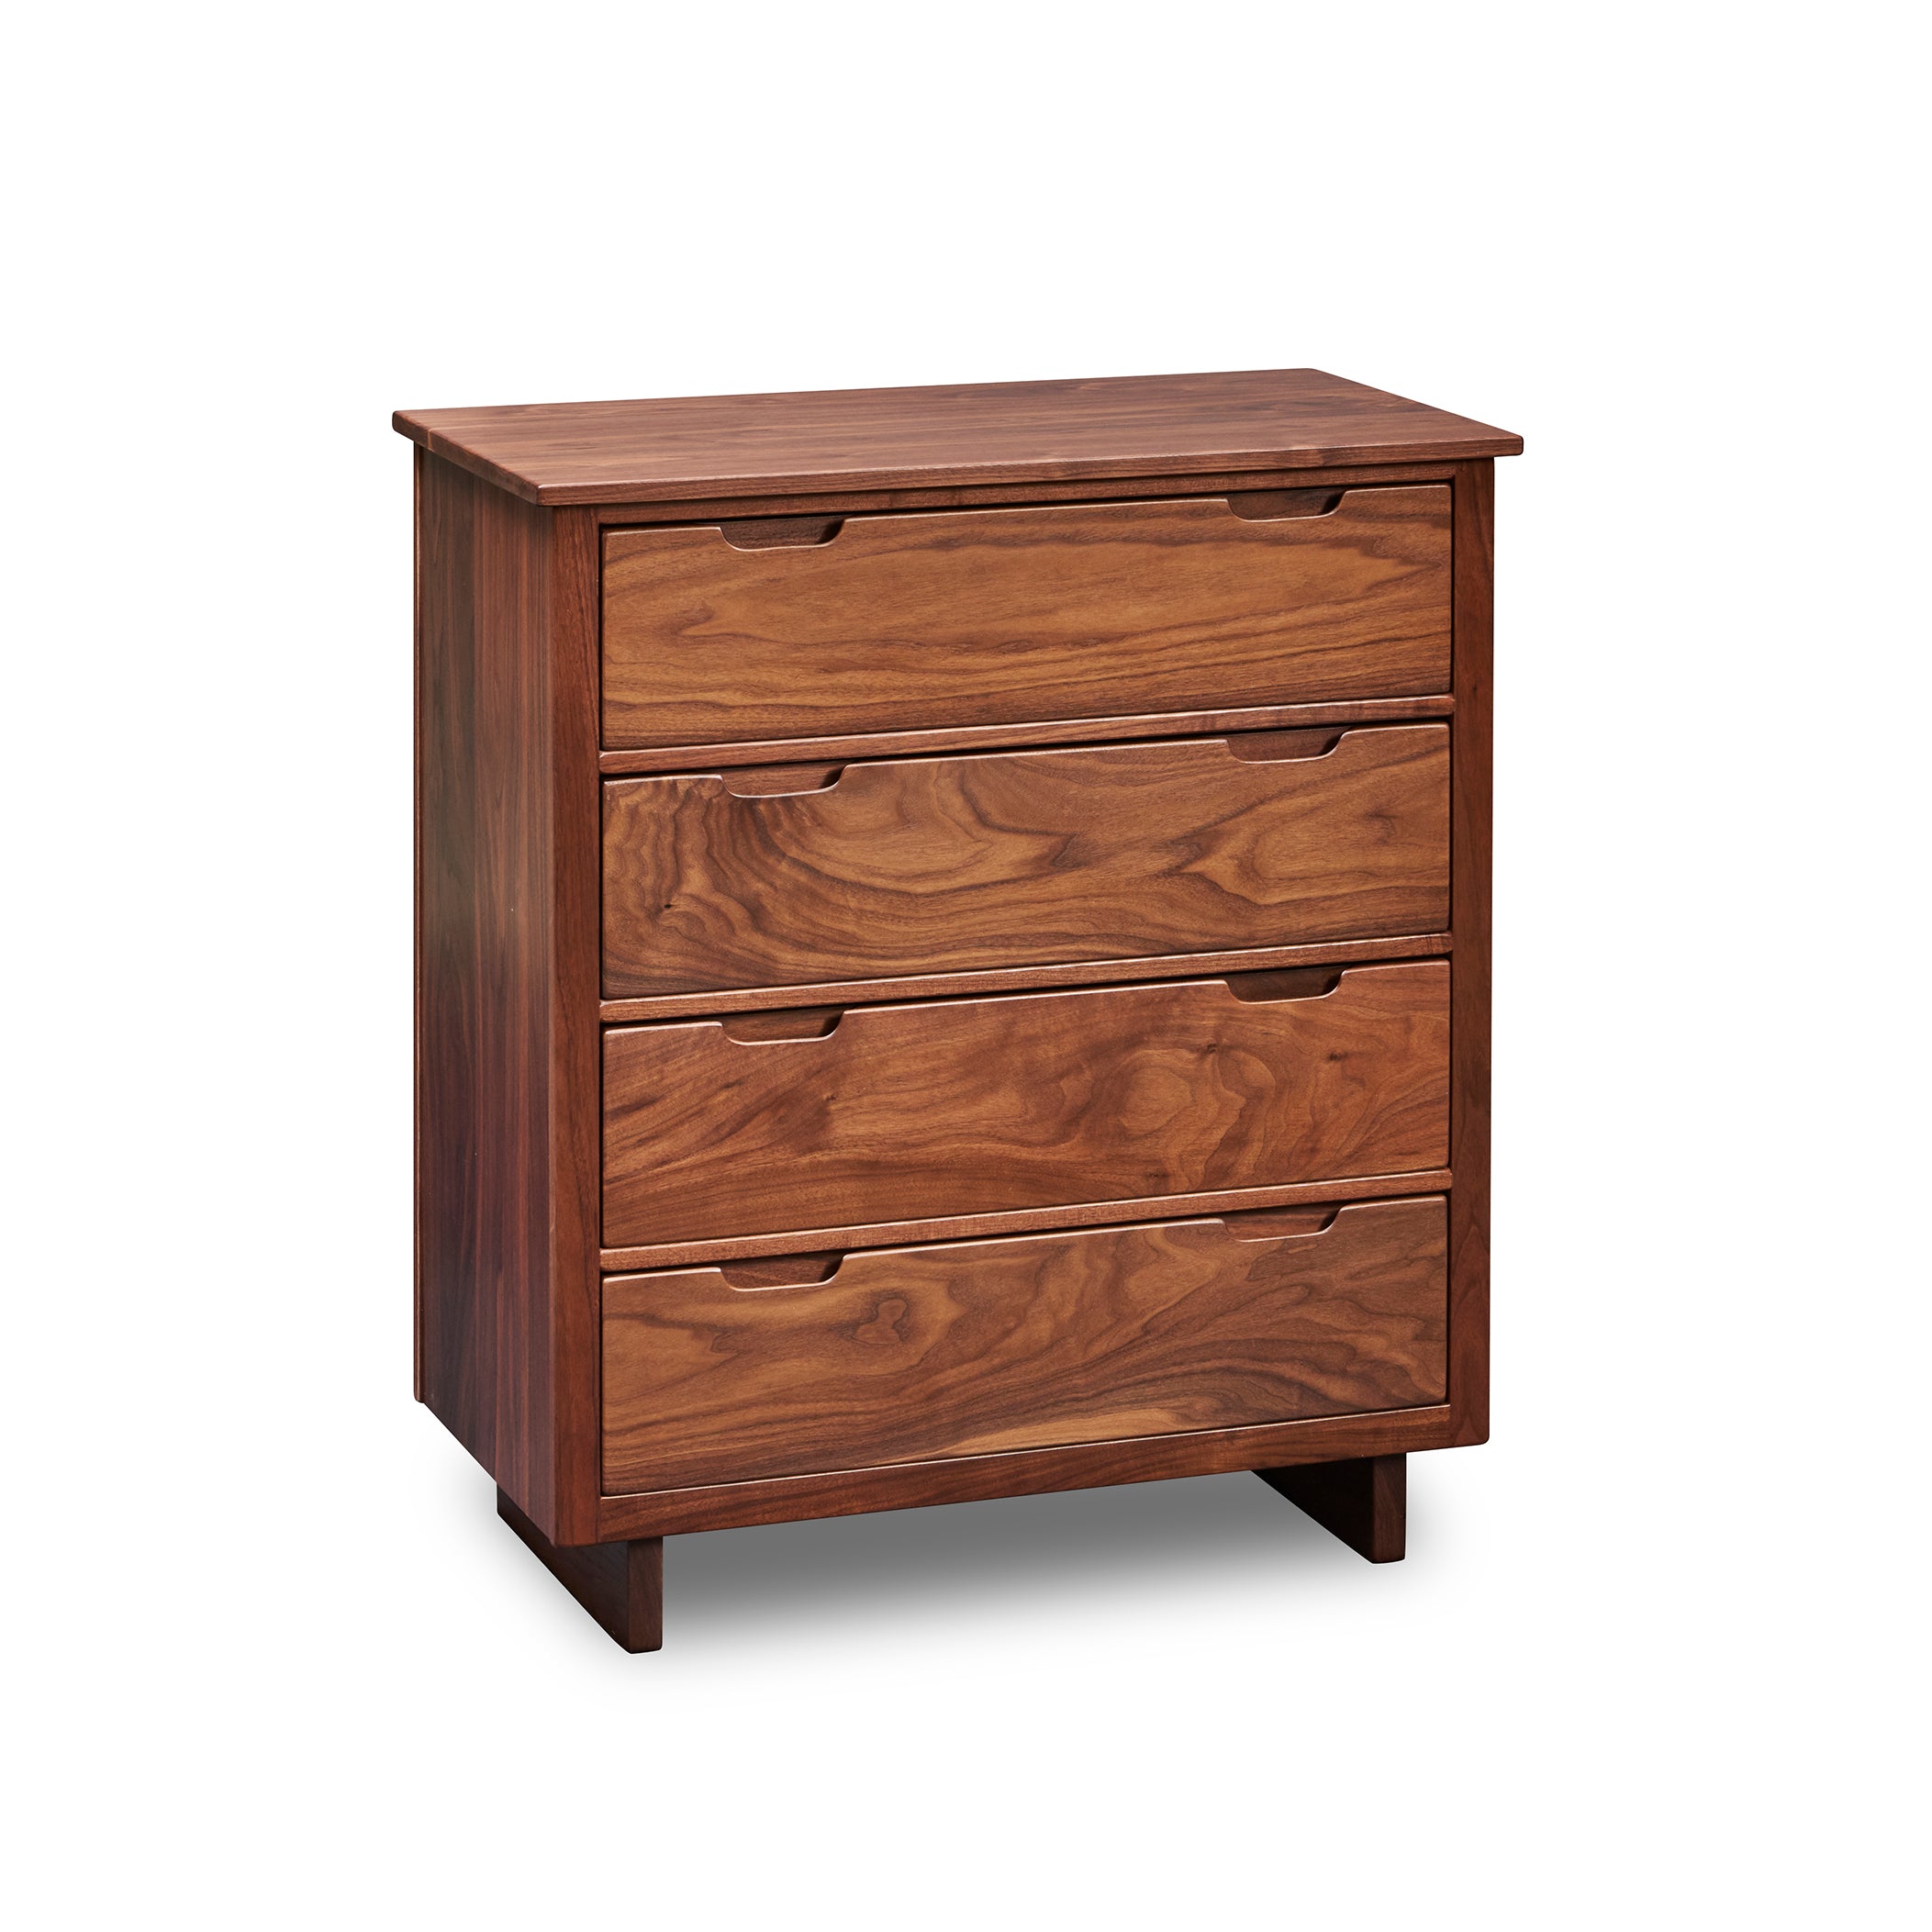 Four drawer Foundation Chest in walnut wood with trestle base and built in drawer pulls